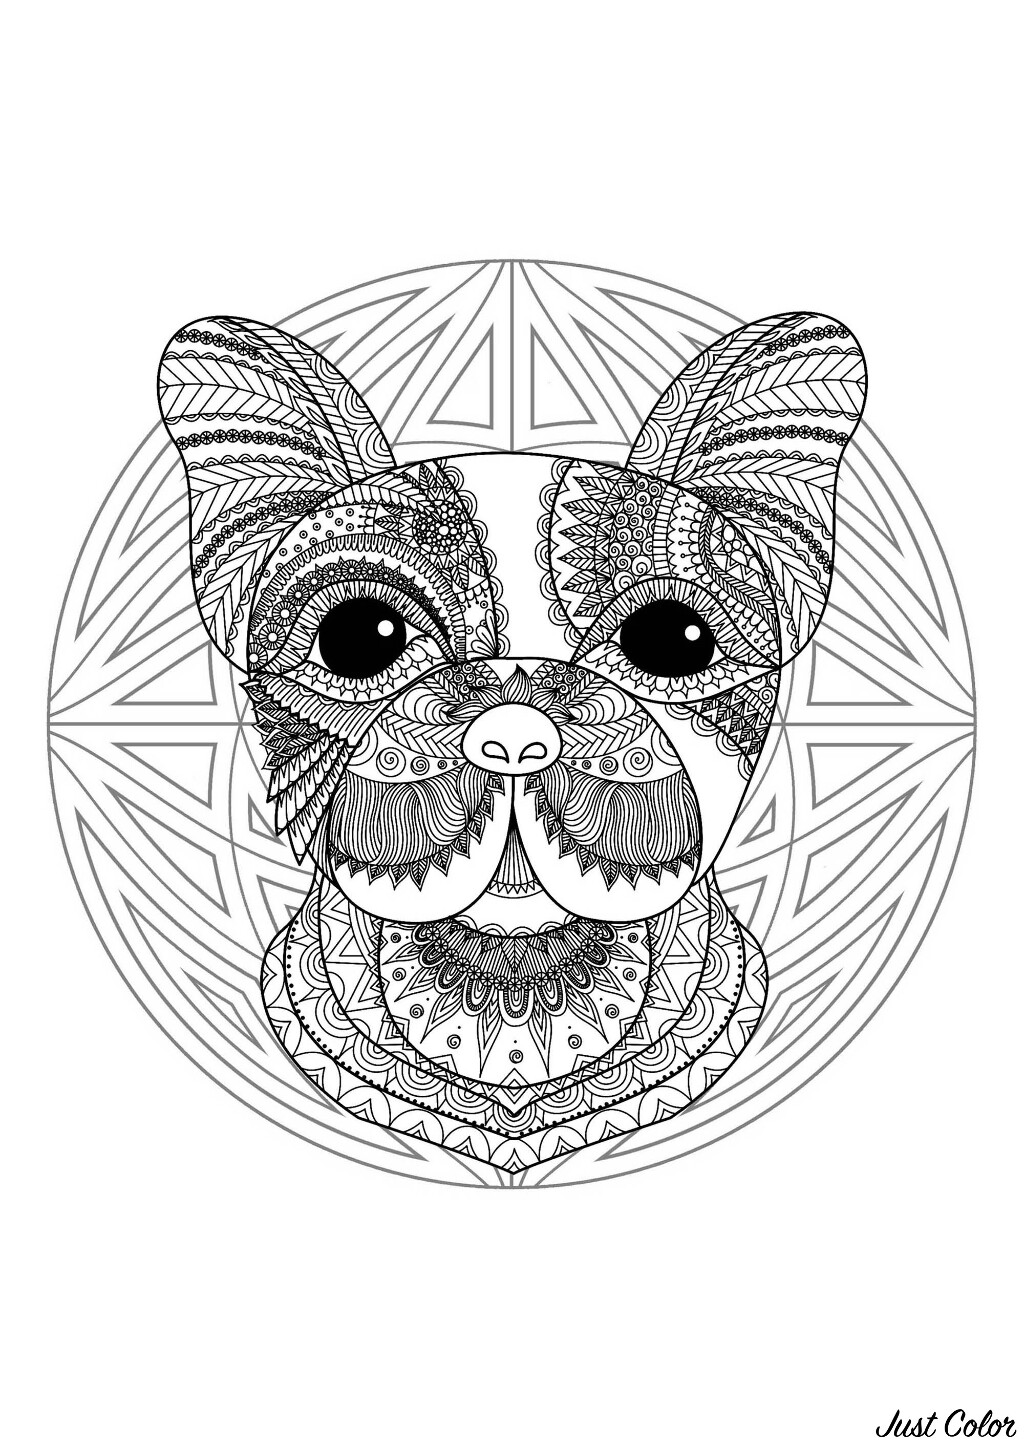 Coloring page with funny Dog head and beautiful Mandala in background